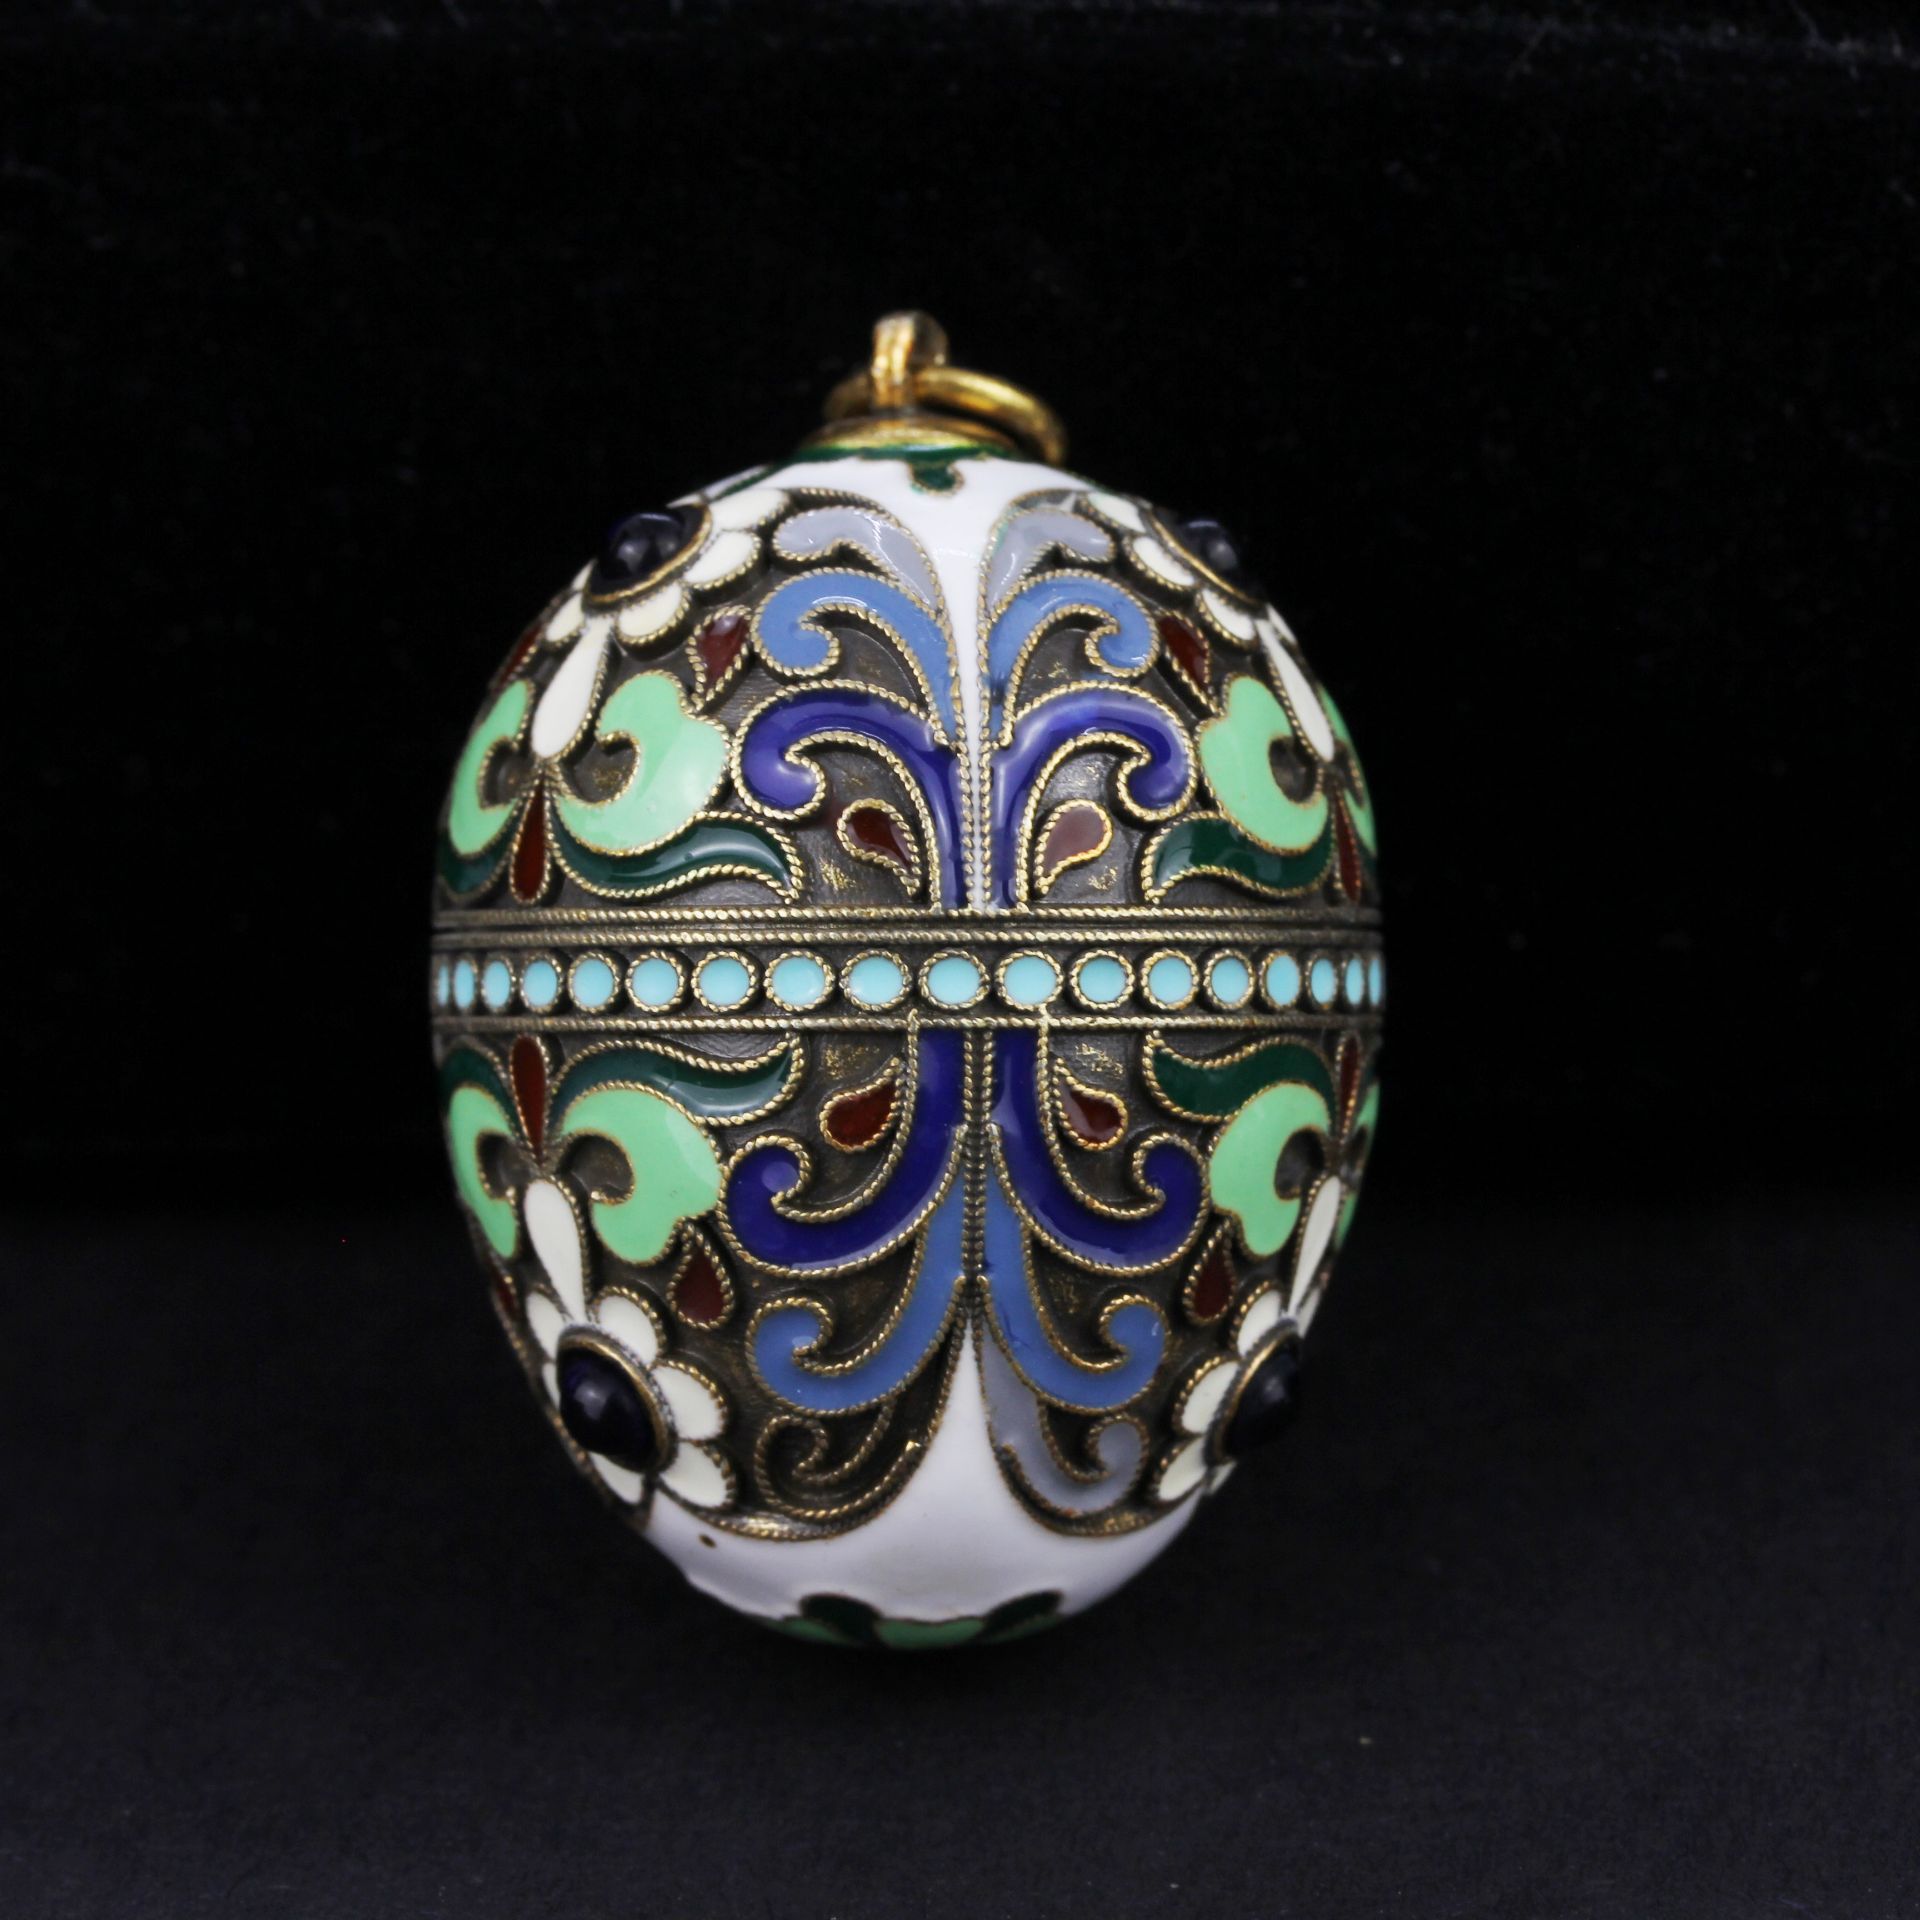 A Russian silver egg pendant set with cabochon cut sapphires, L. 4.5cm. - Image 3 of 4